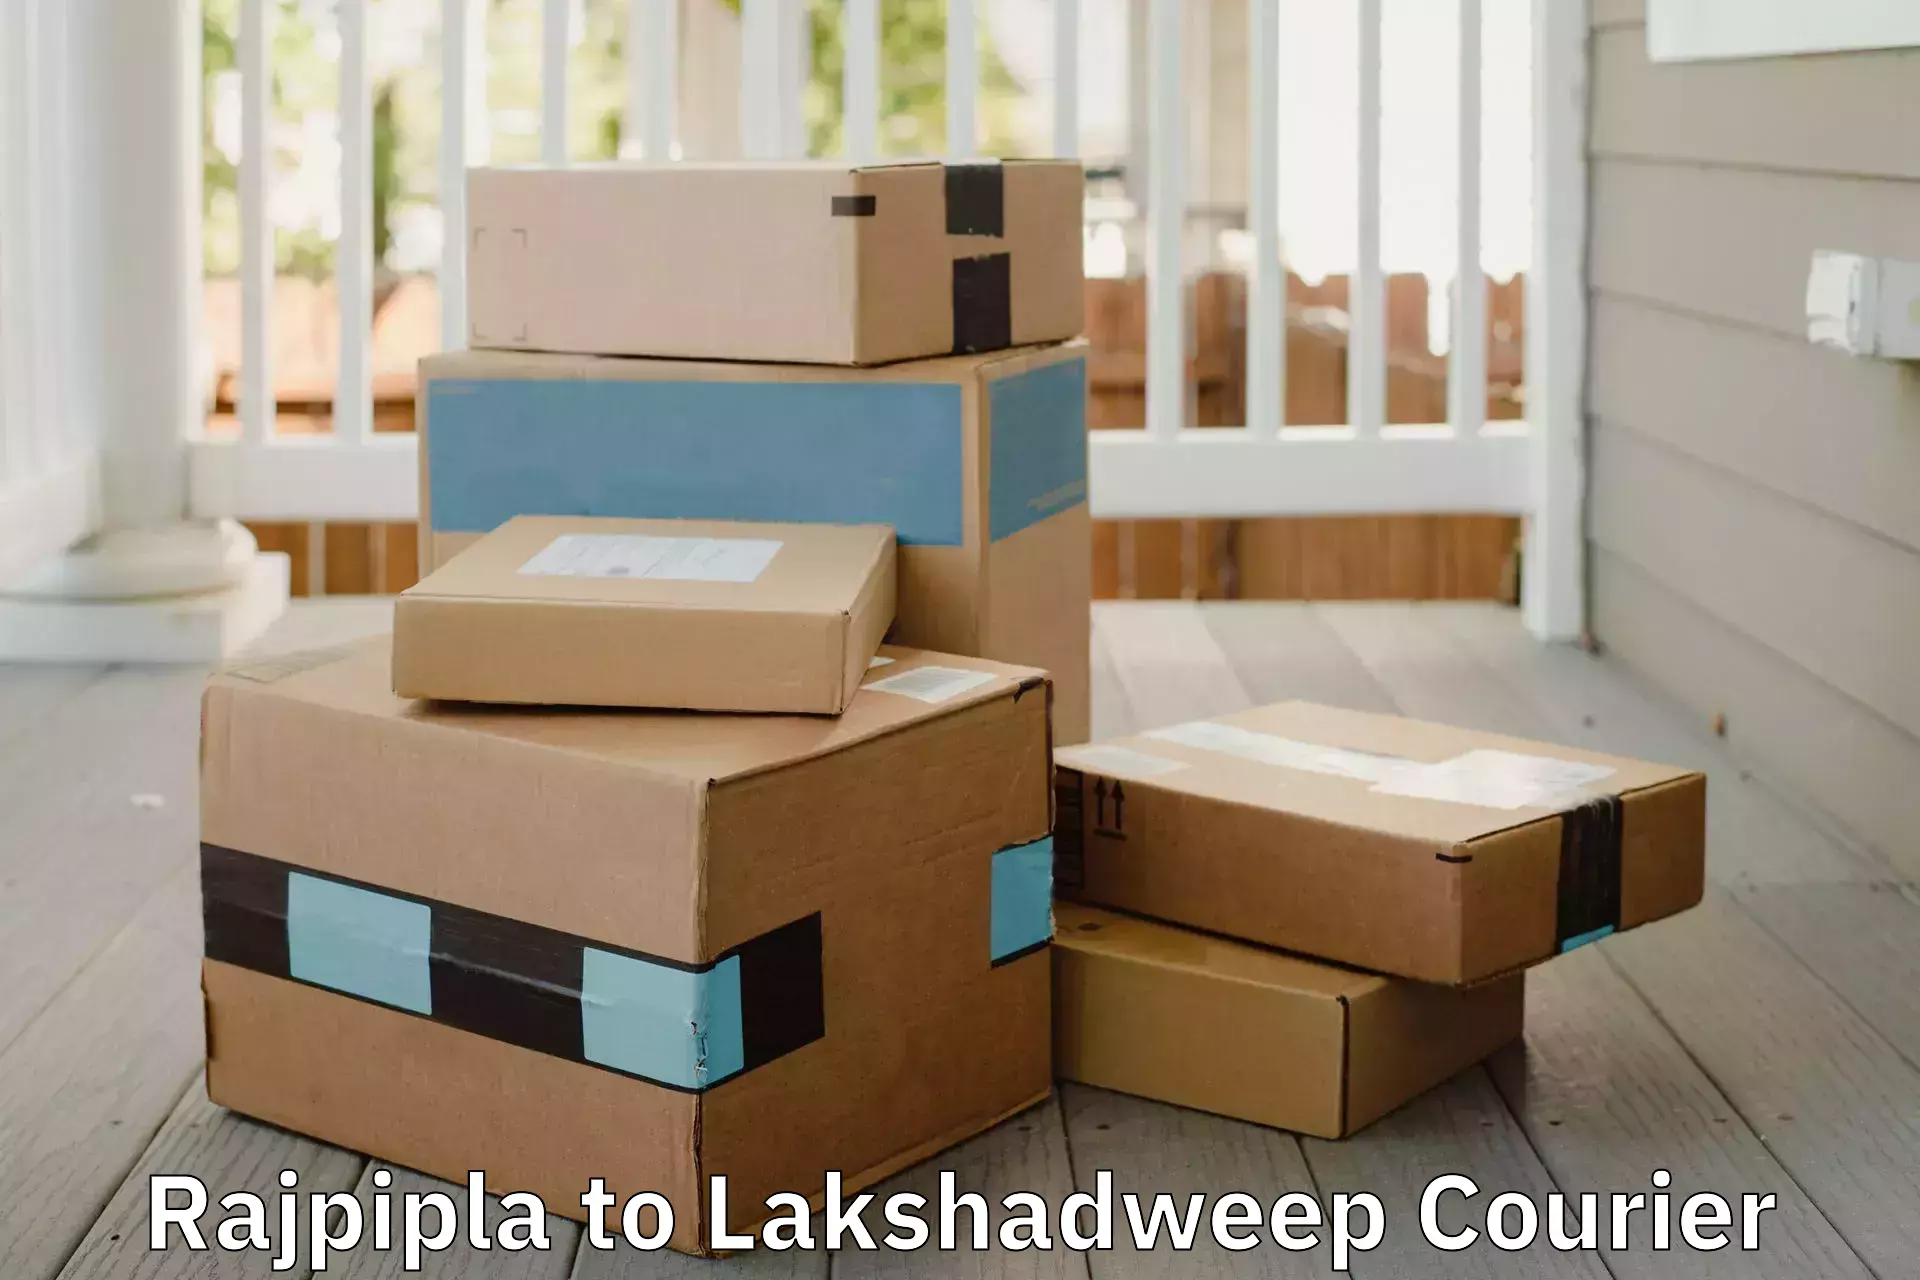 Reliable furniture transport in Rajpipla to Lakshadweep